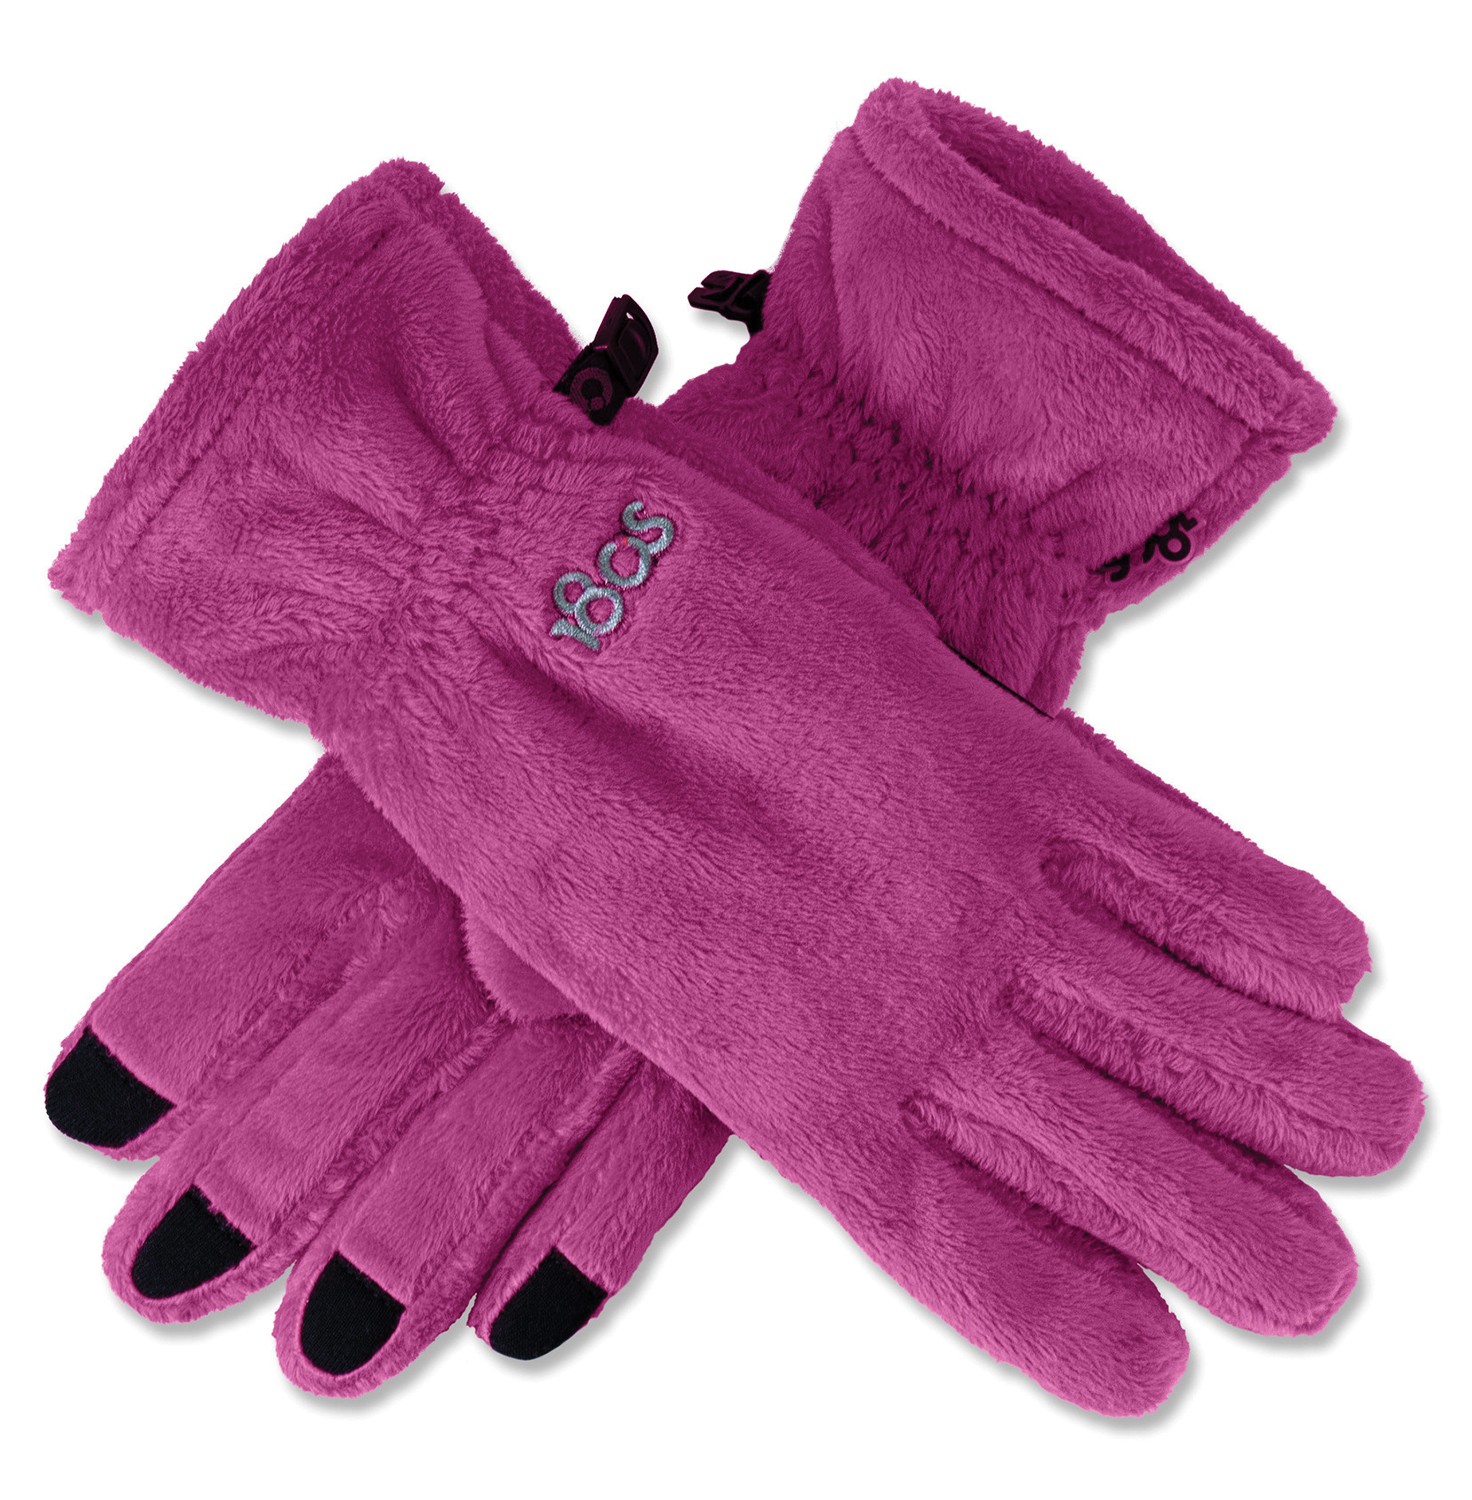 The Lush glove is made of super-soft plush fleece that wraps your hands in cozy warmth. It features our ALLTouch™ Technology on the fingertips that allows you to control your touch screen devices without having to remove your gloves. The Lush also has a faux suede palm patch for added grip and durability while an elastic wrist cinch keeps the warmth in and the cold out.